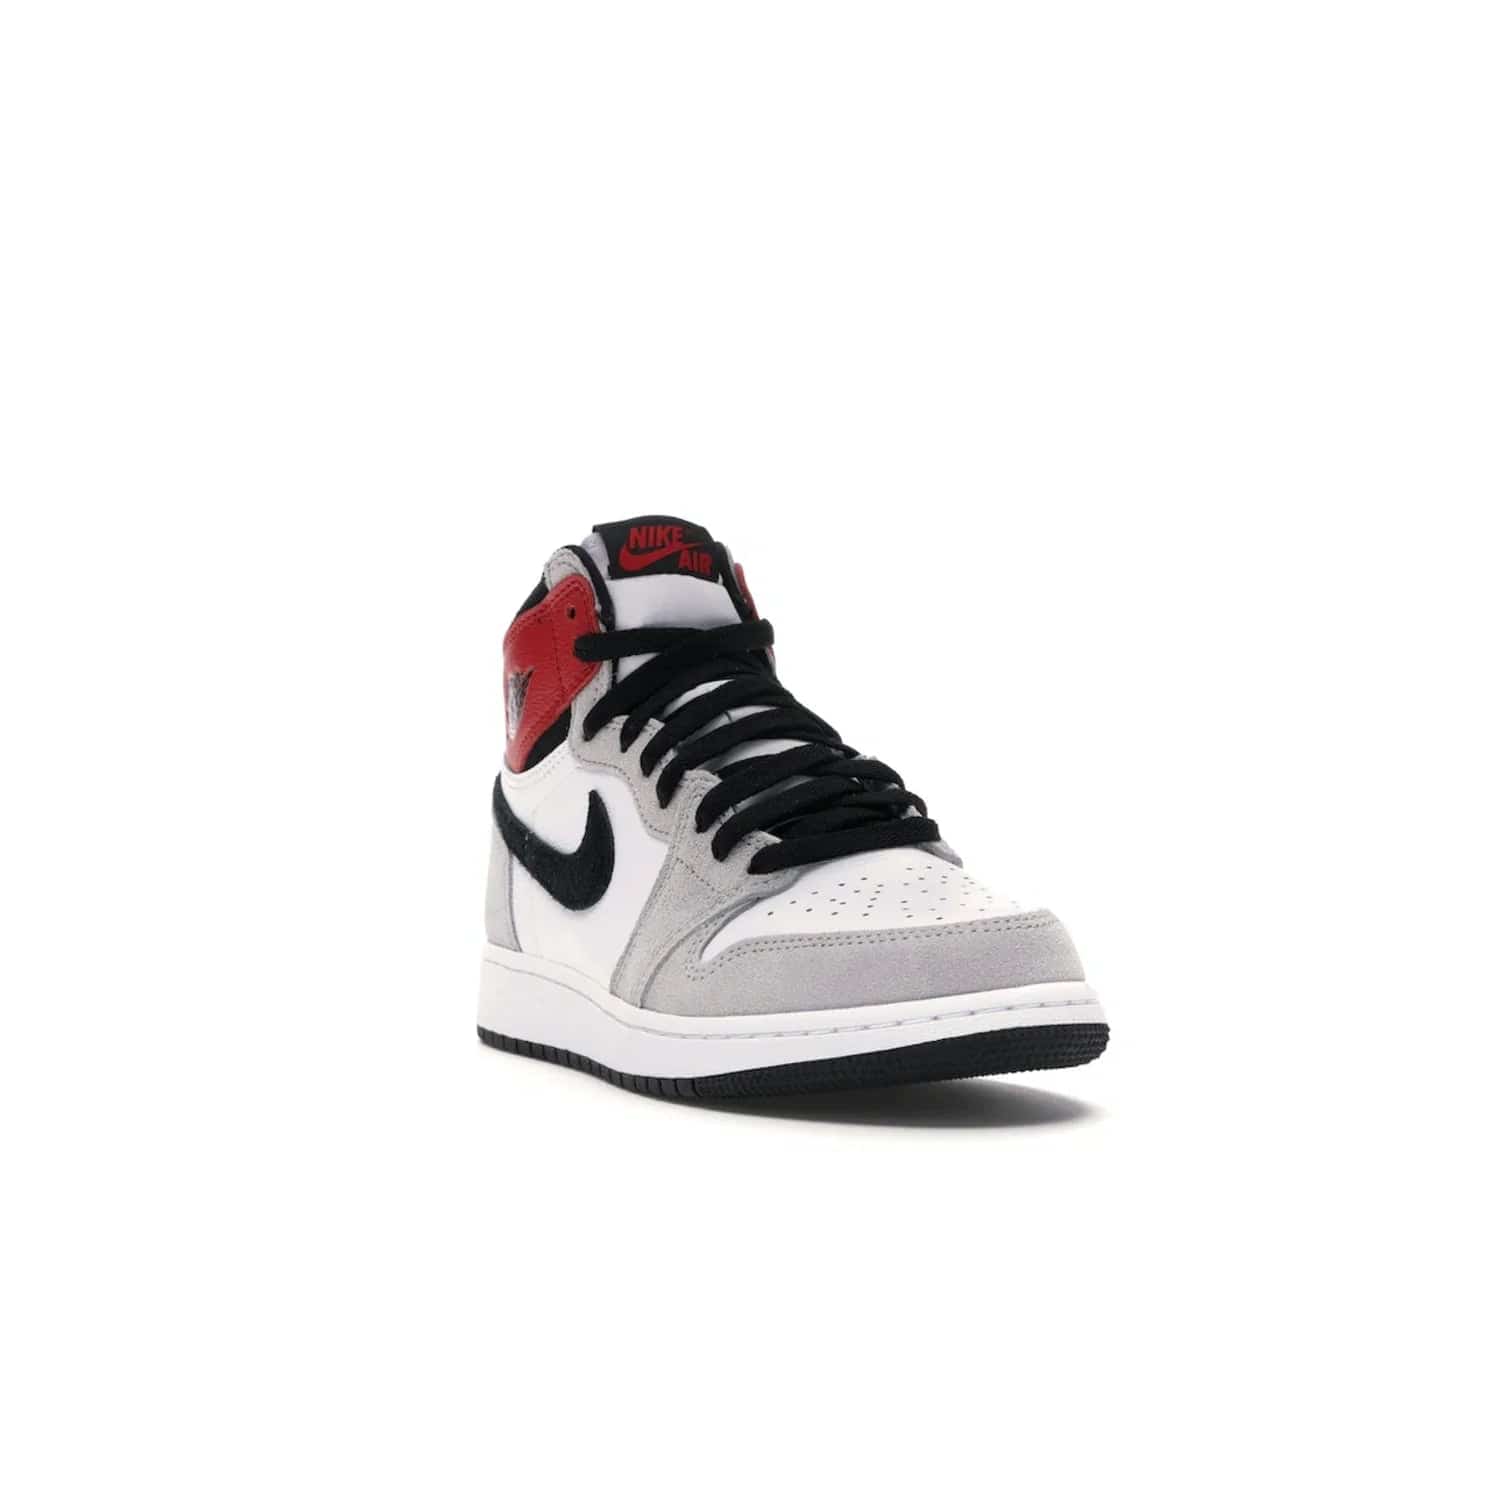 Jordan 1 Retro High Light Smoke Grey (GS) - Image 7 - Only at www.BallersClubKickz.com - Jordan 1 Retro High Light Smoke Grey (GS) features shades of grey, black, and Varsity Red with a bold silhouette. Premium white leather and suede overlays create a unique look. Released July 2020, offering style and performance. Perfect sneaker for any collector or fan.